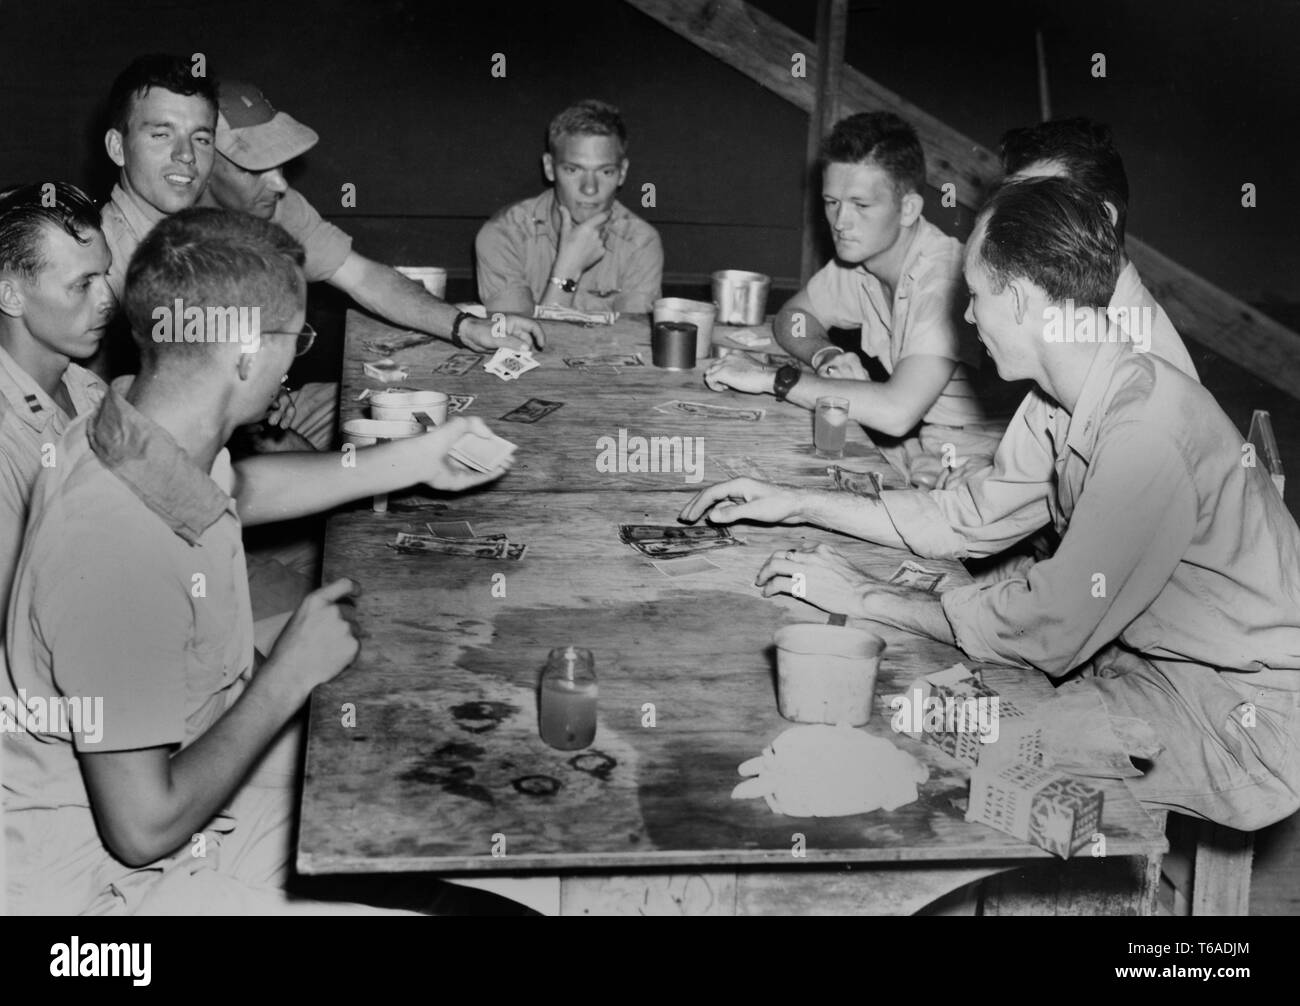 US servicemen play cards on their base in the South Pacific during World War II, ca. 1943. Stock Photo